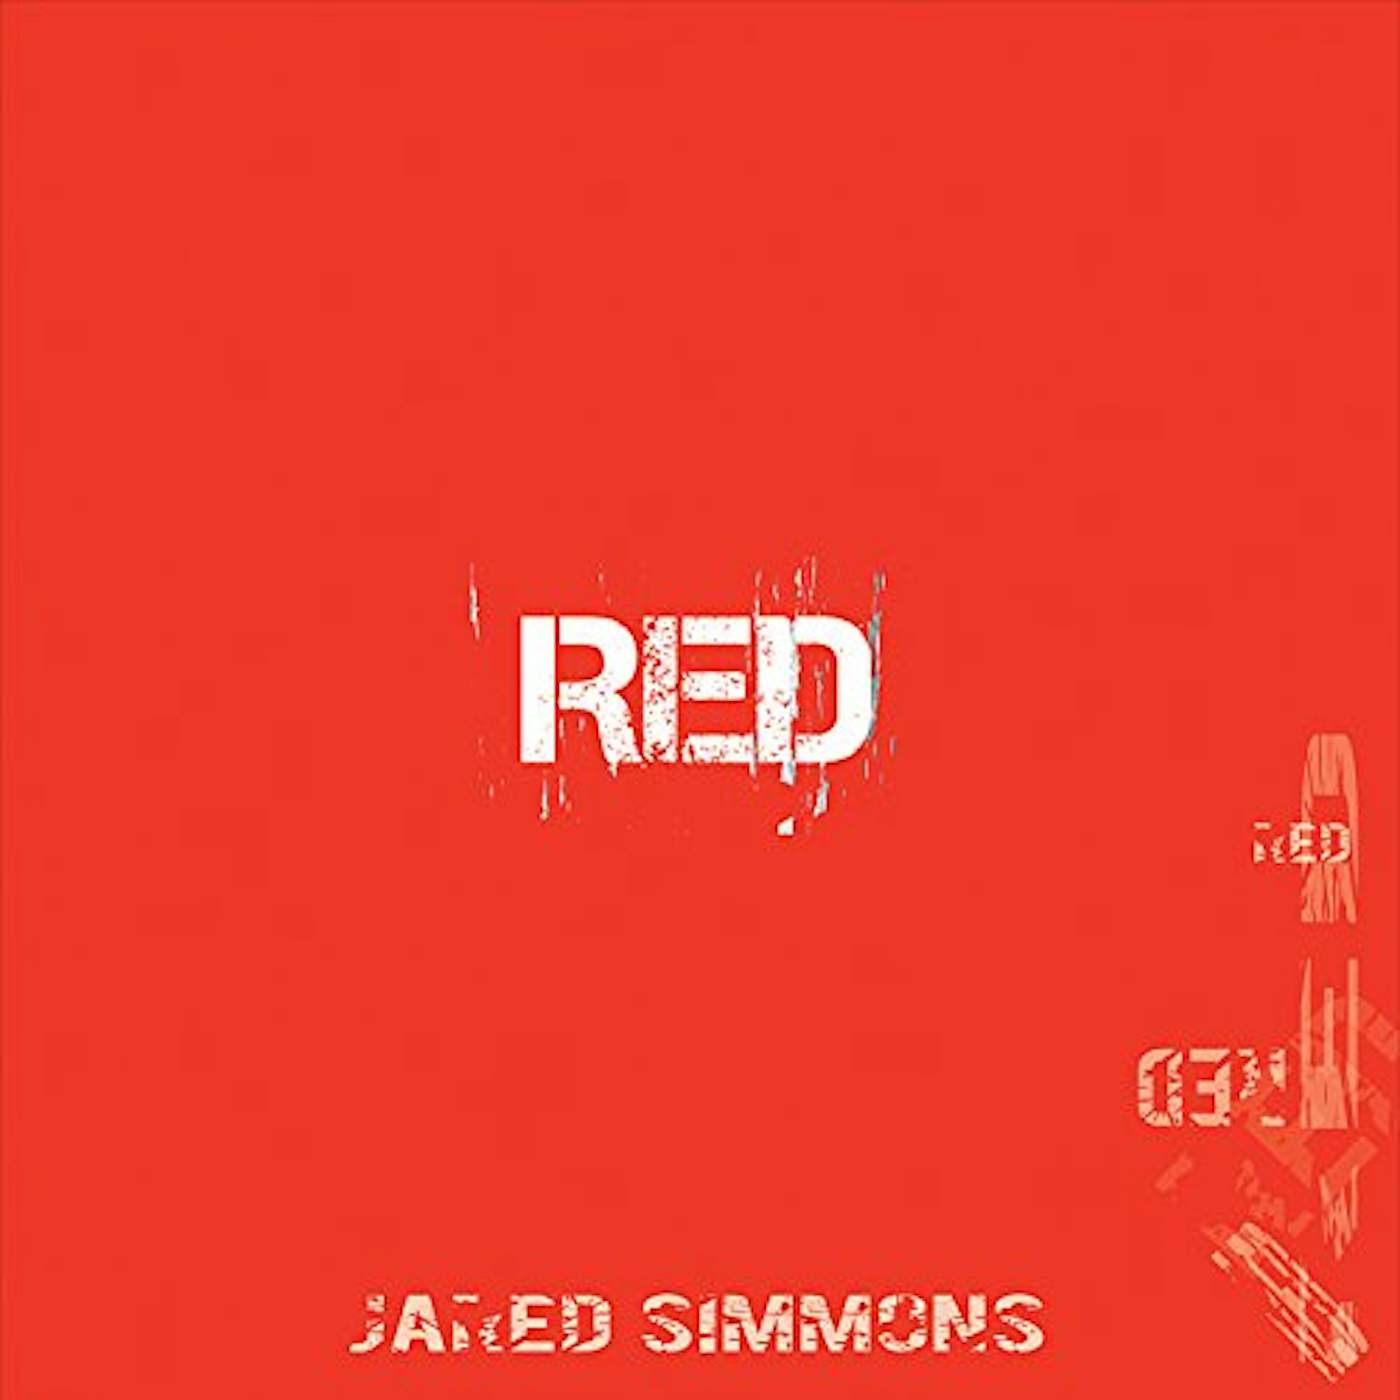 Jared Simmons RED CD